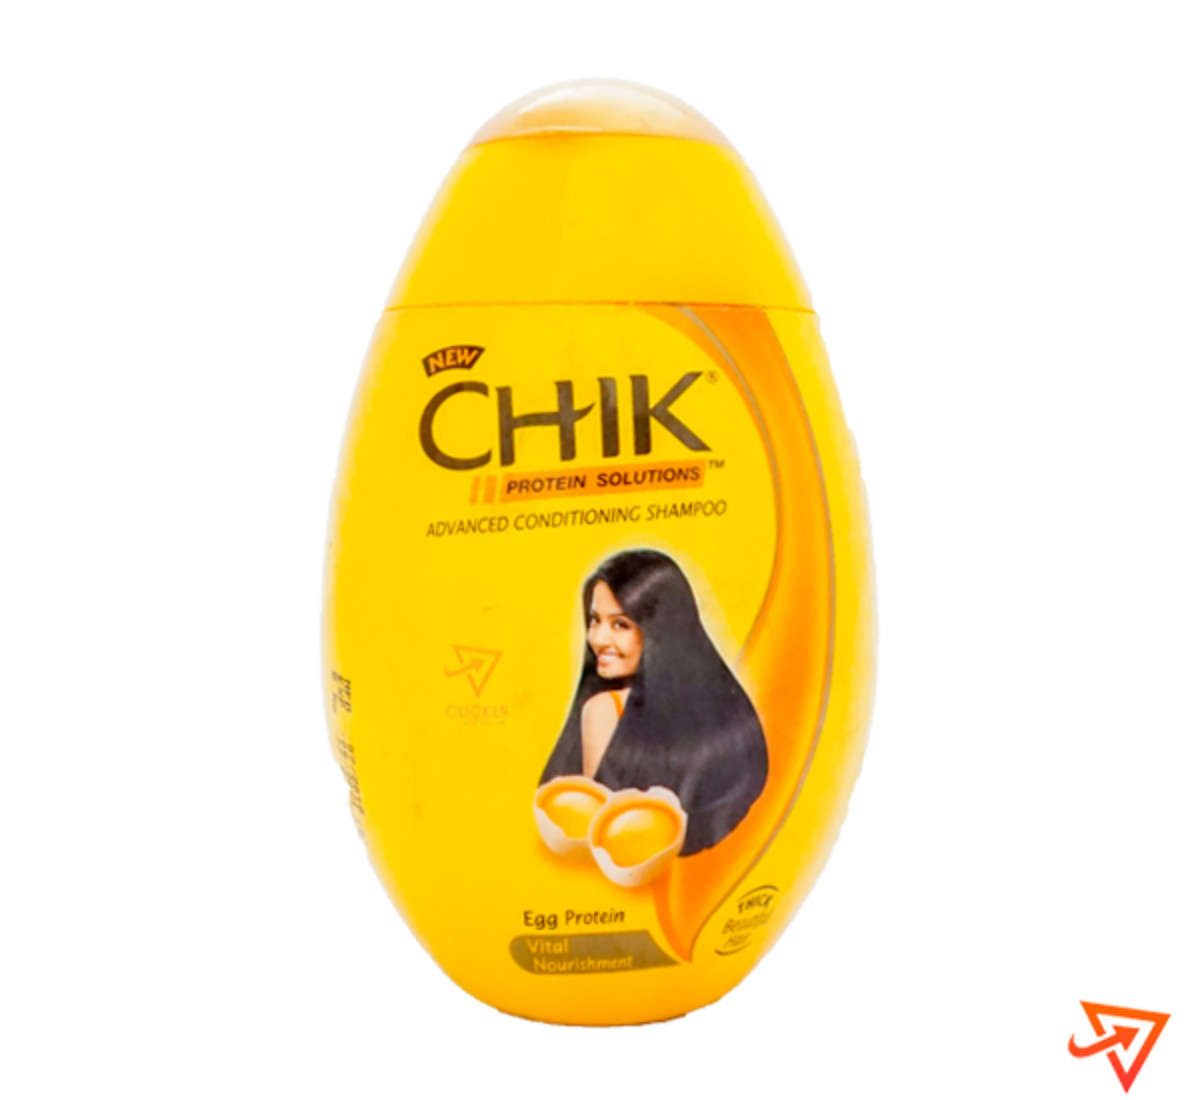 Clicker product 180ml CHIK protein solutions advanced conditioning shampoo egg protein vital nourishment 1053